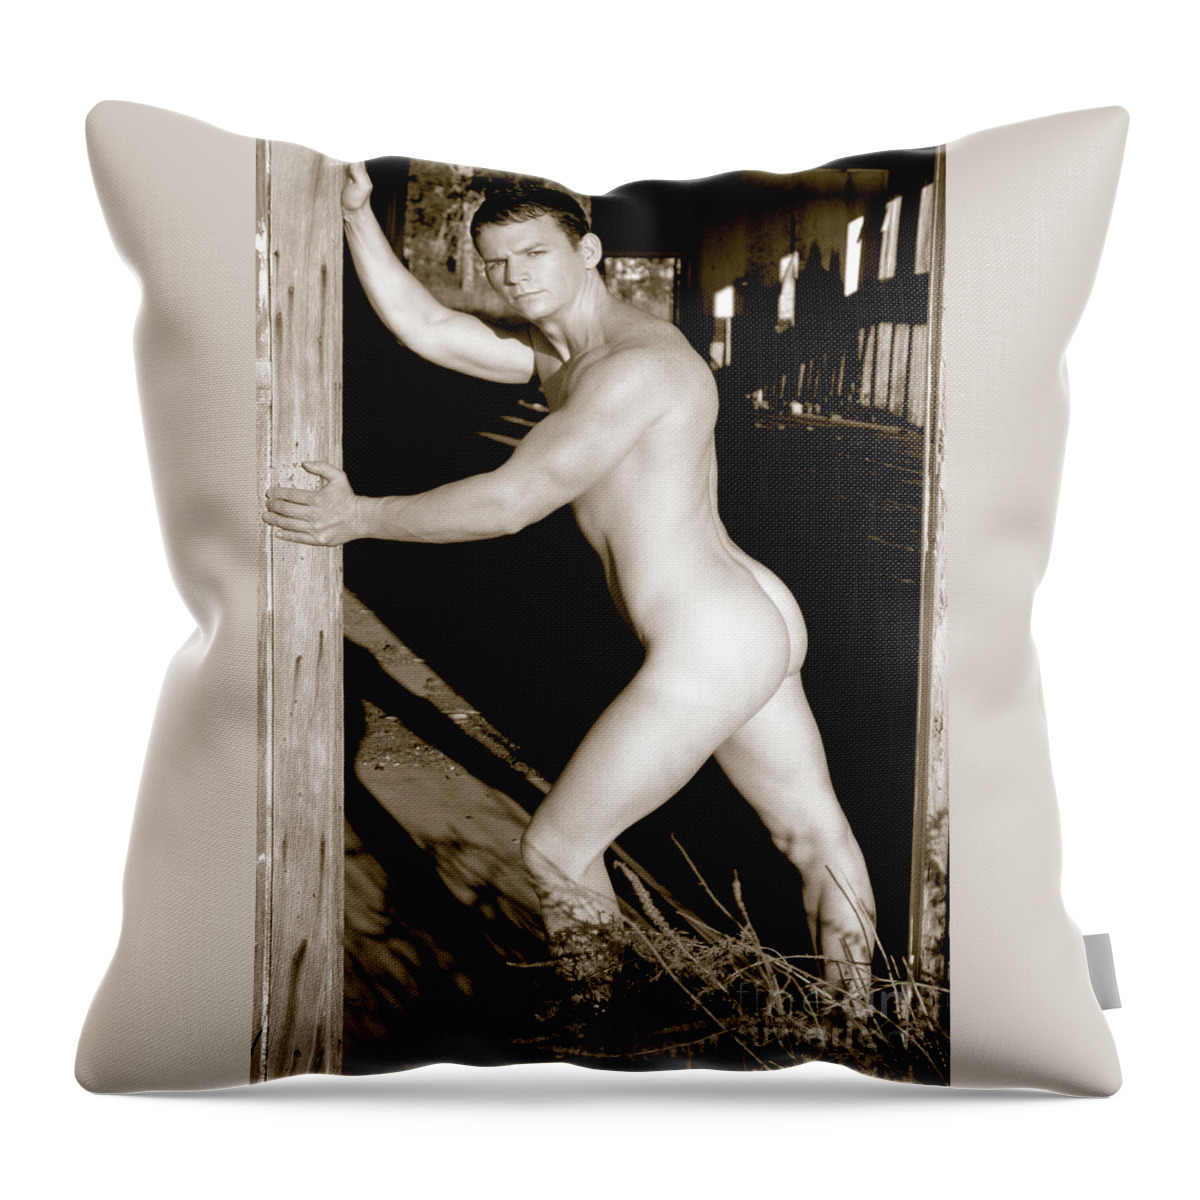 Nude Throw Pillow featuring the photograph Male Nude at the Door by Gunther Allen